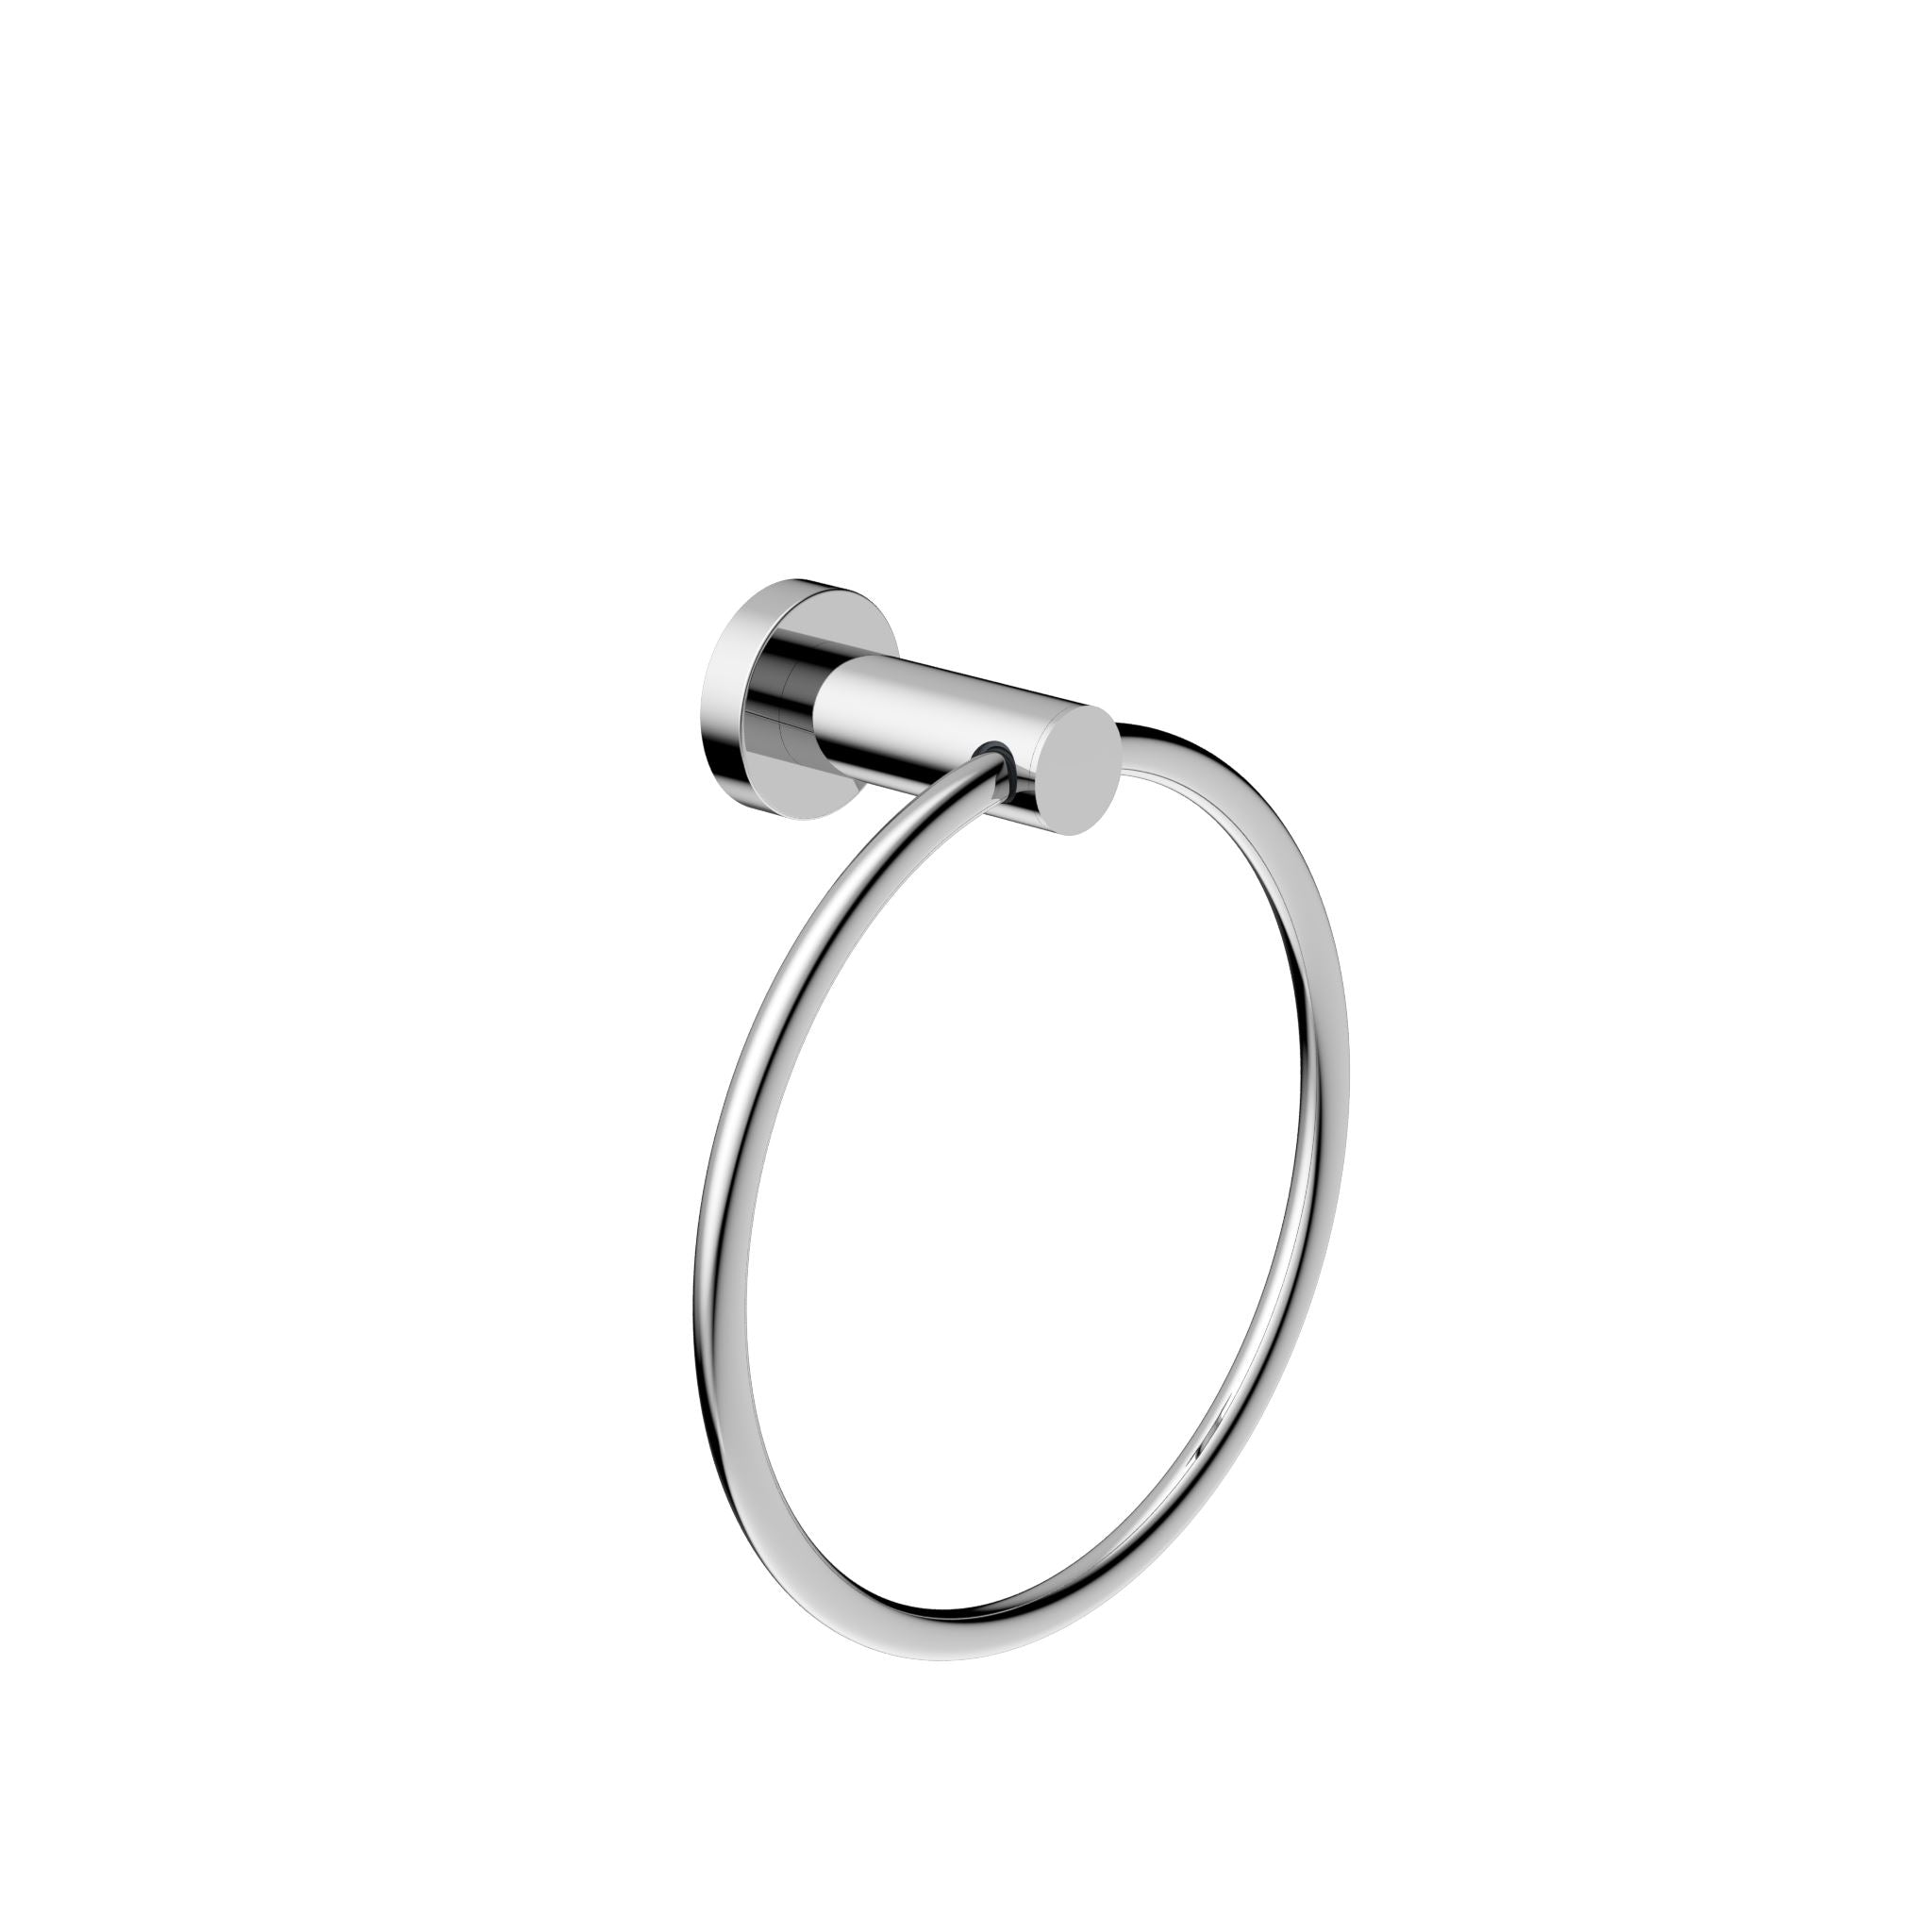 Nero Dolce Hand Towel Ring Chrome 2080